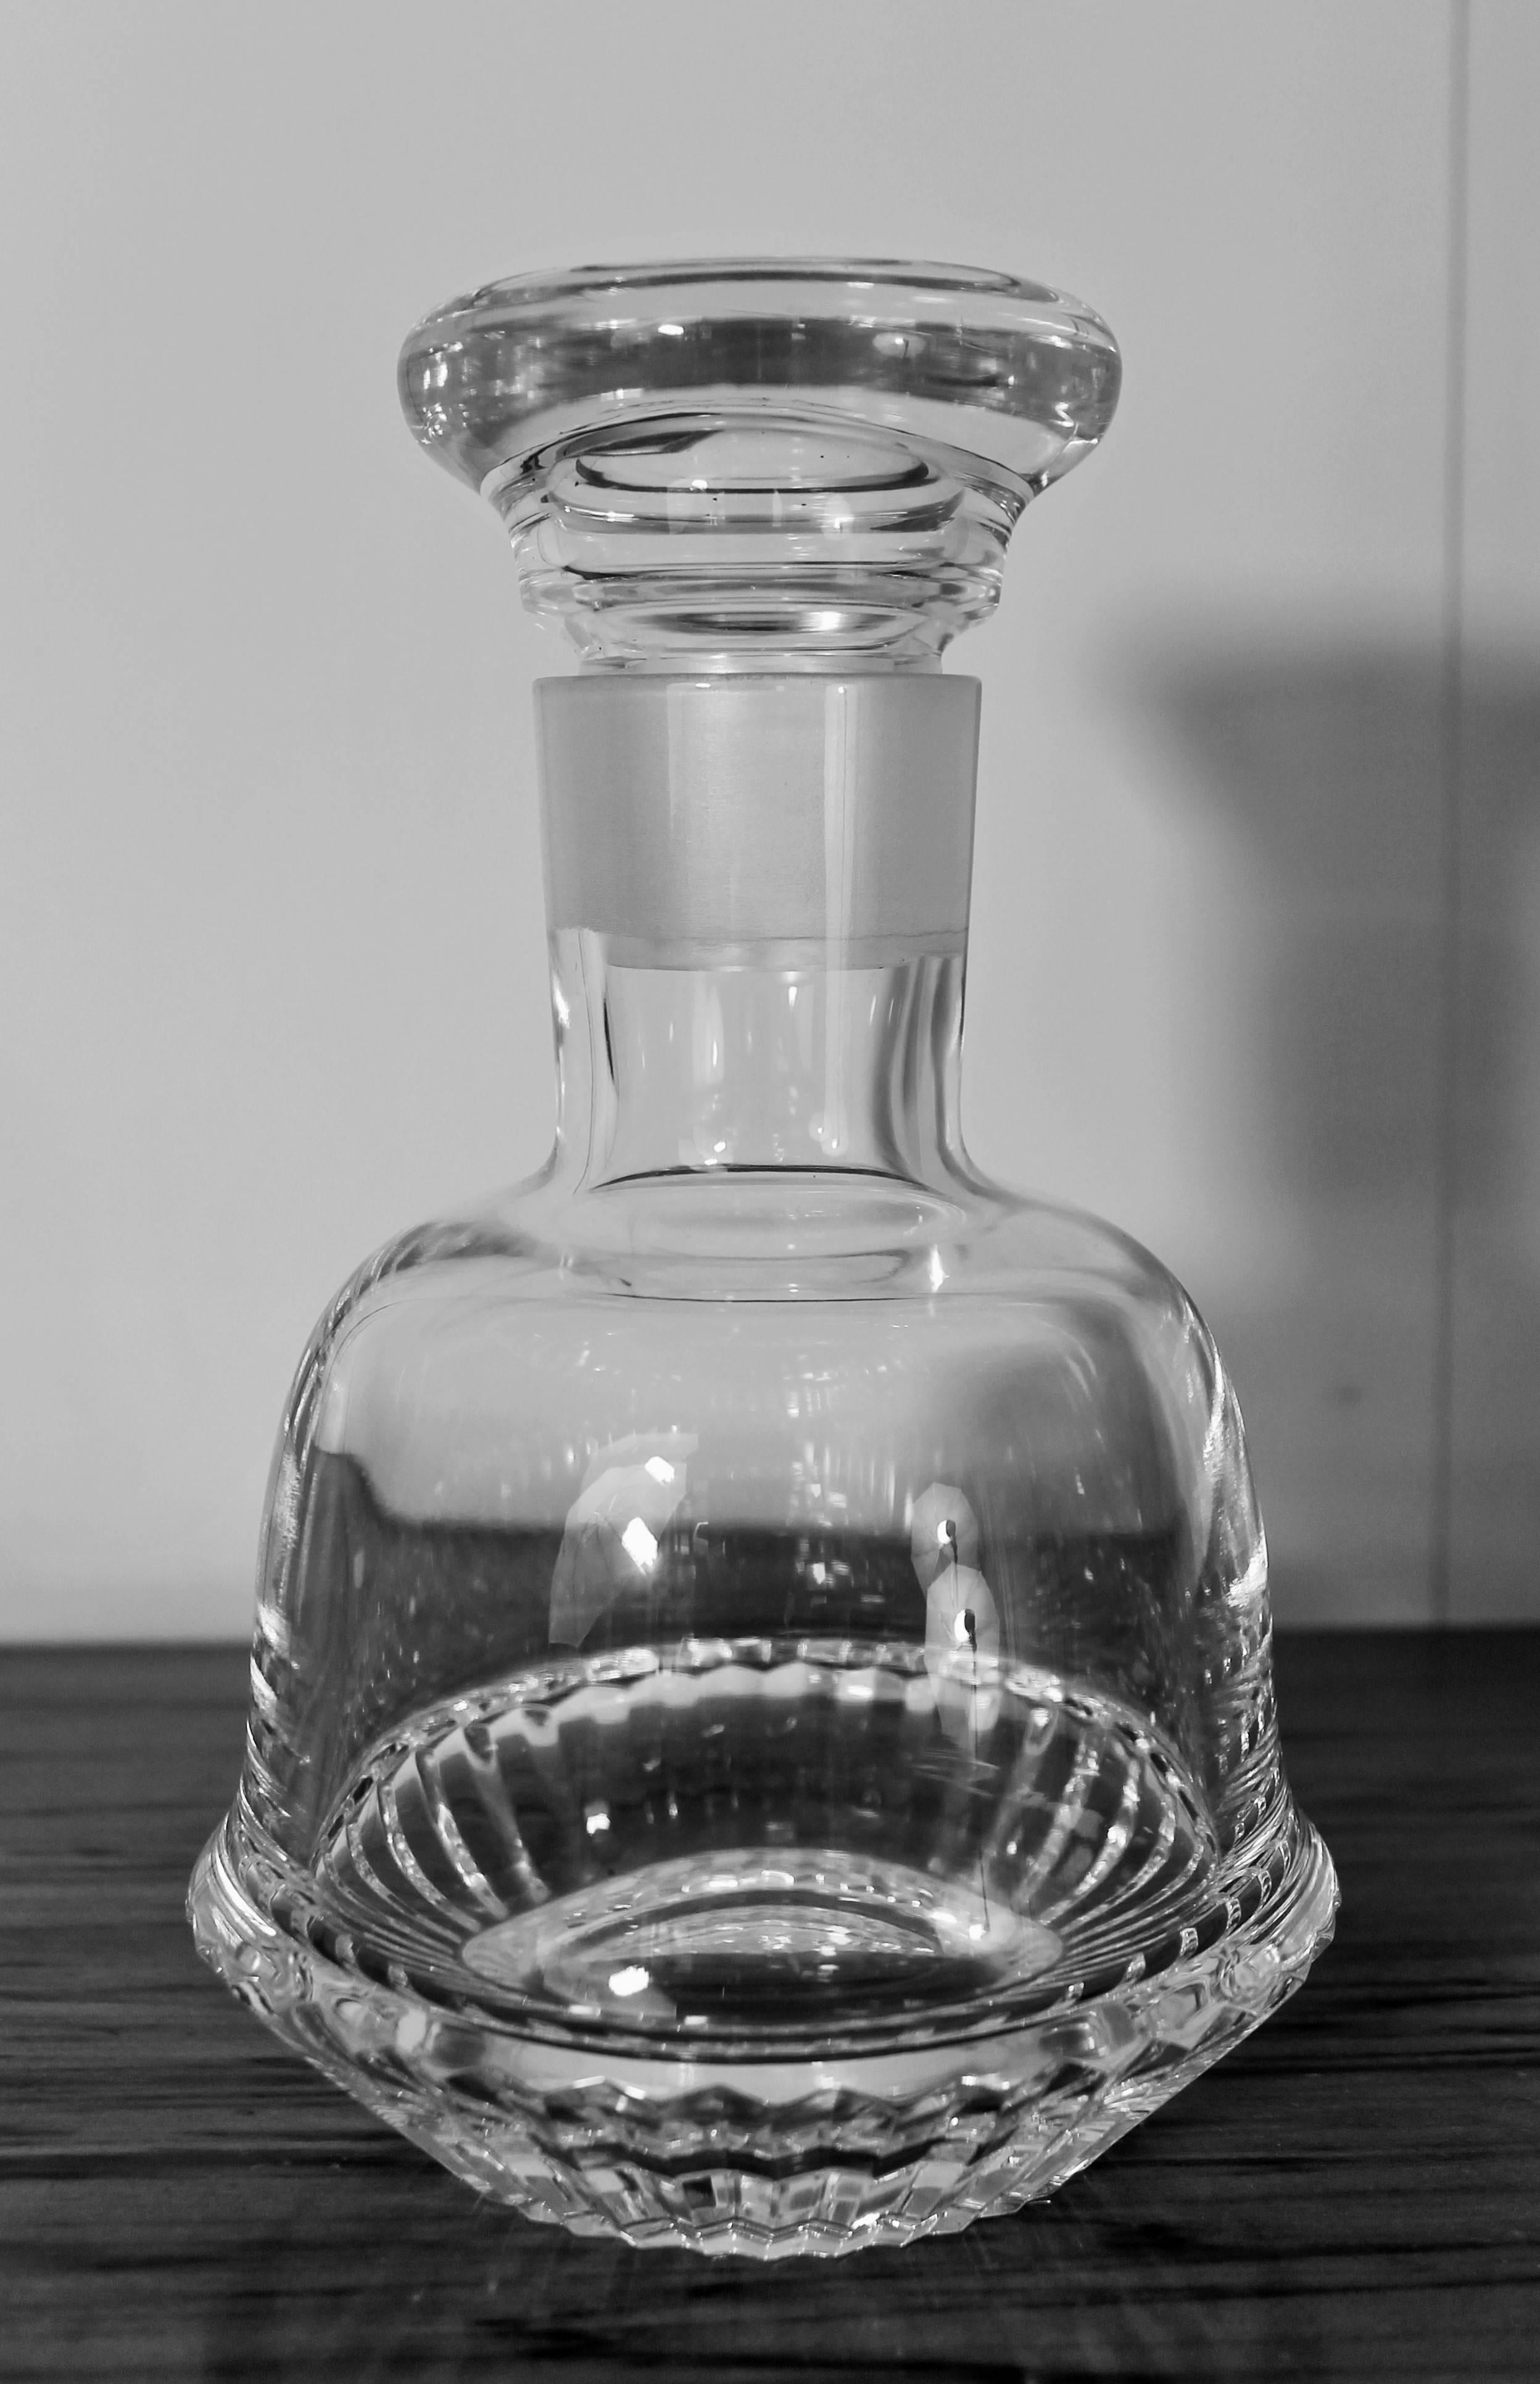 Circular crystal whiskey carafe.
Art Deco
Middle of the 20th century.